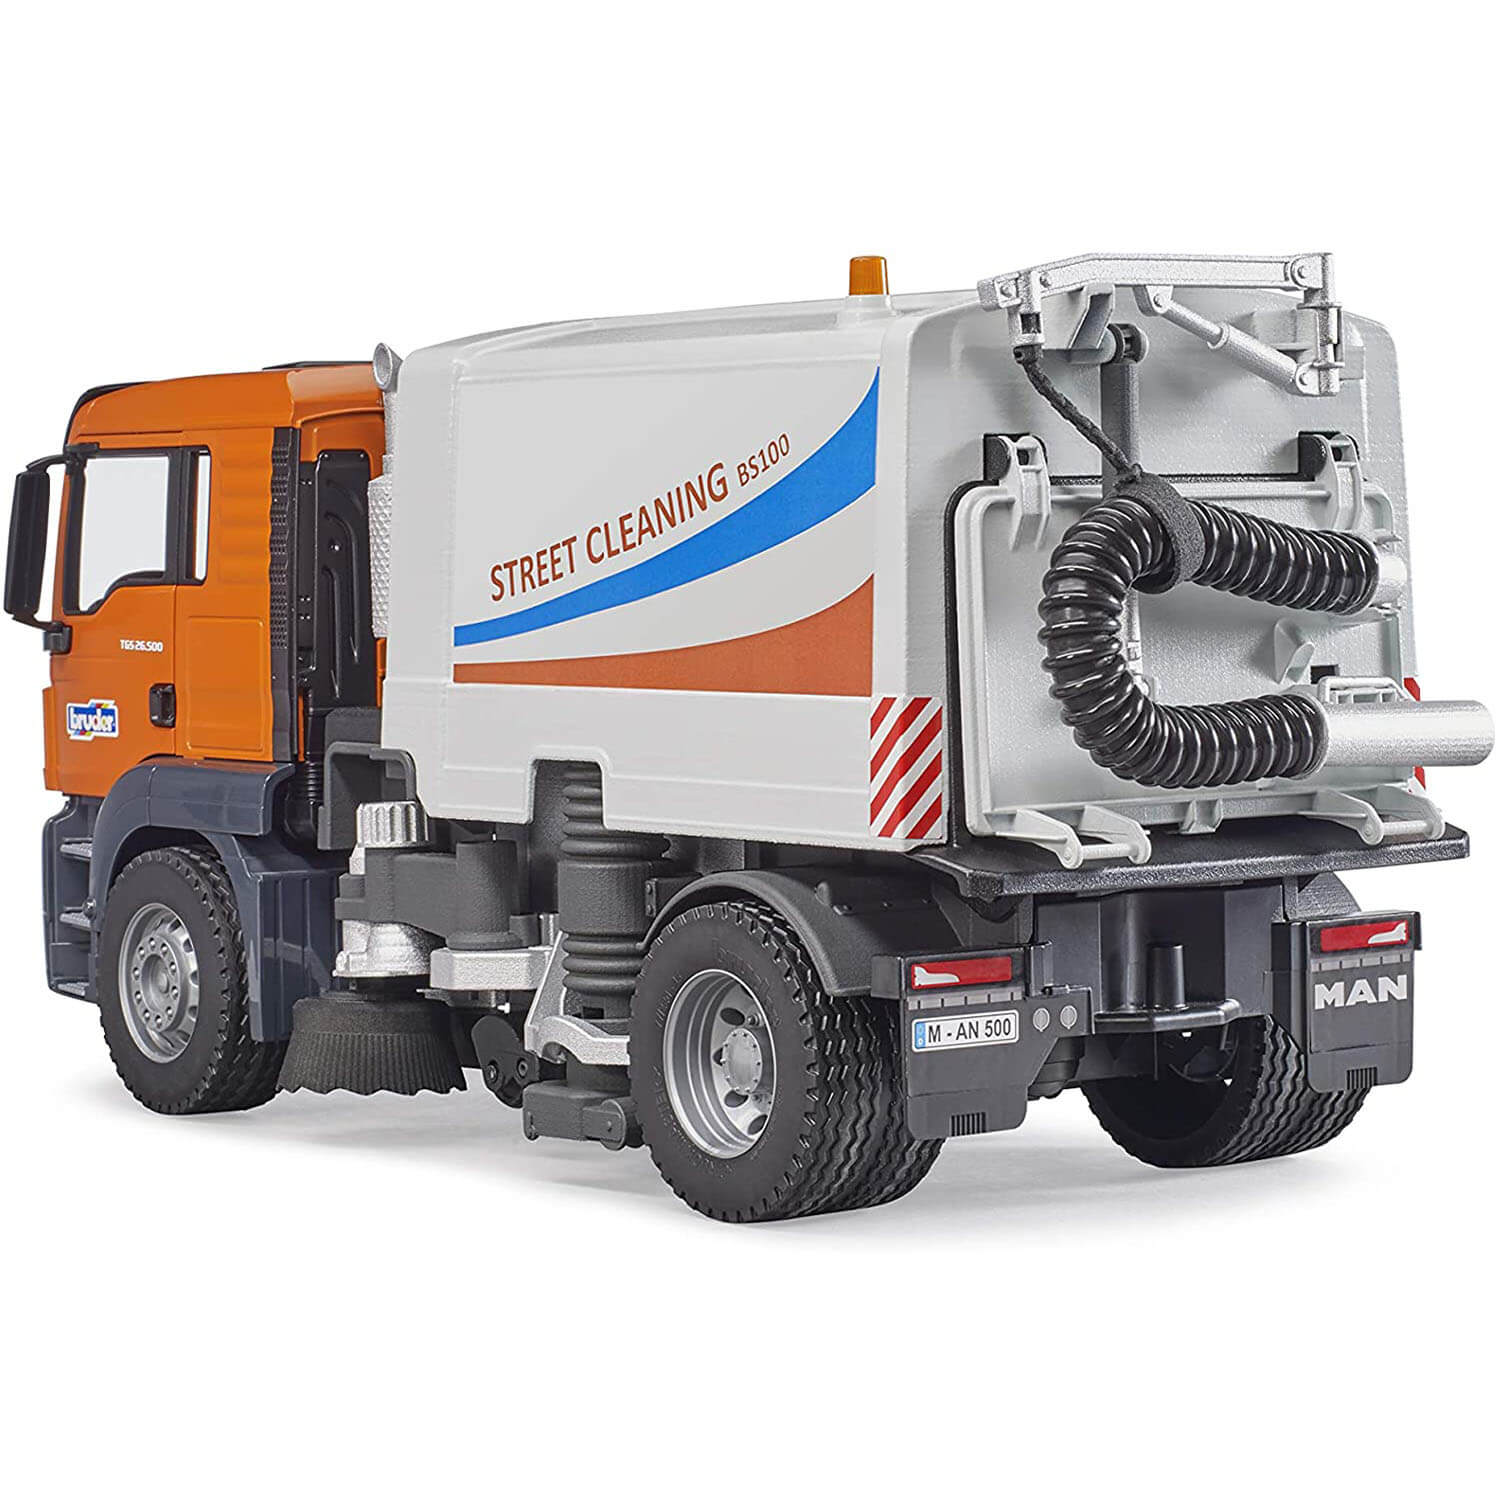 Rear quarter view of the Bruder MAN street sweeper with a orange cab and grey rear. Hose is attached to the back.